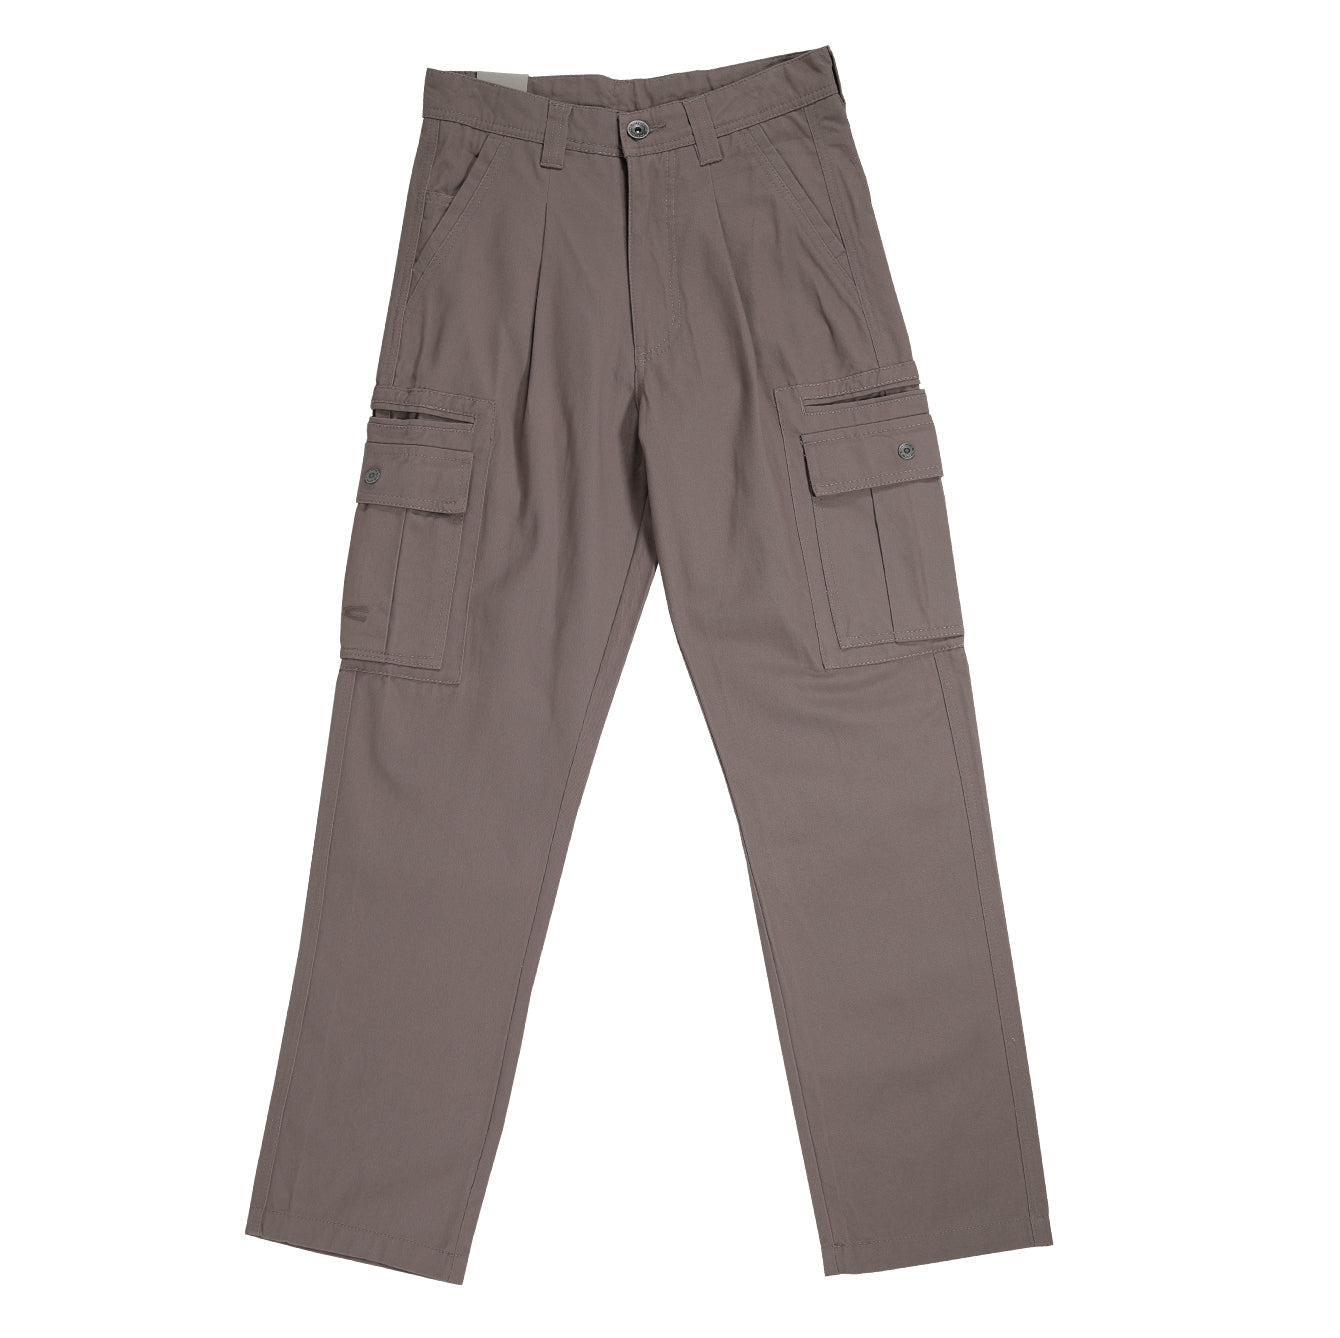 Regular Fit Cargo Trousers available in 3 Colors - camel active